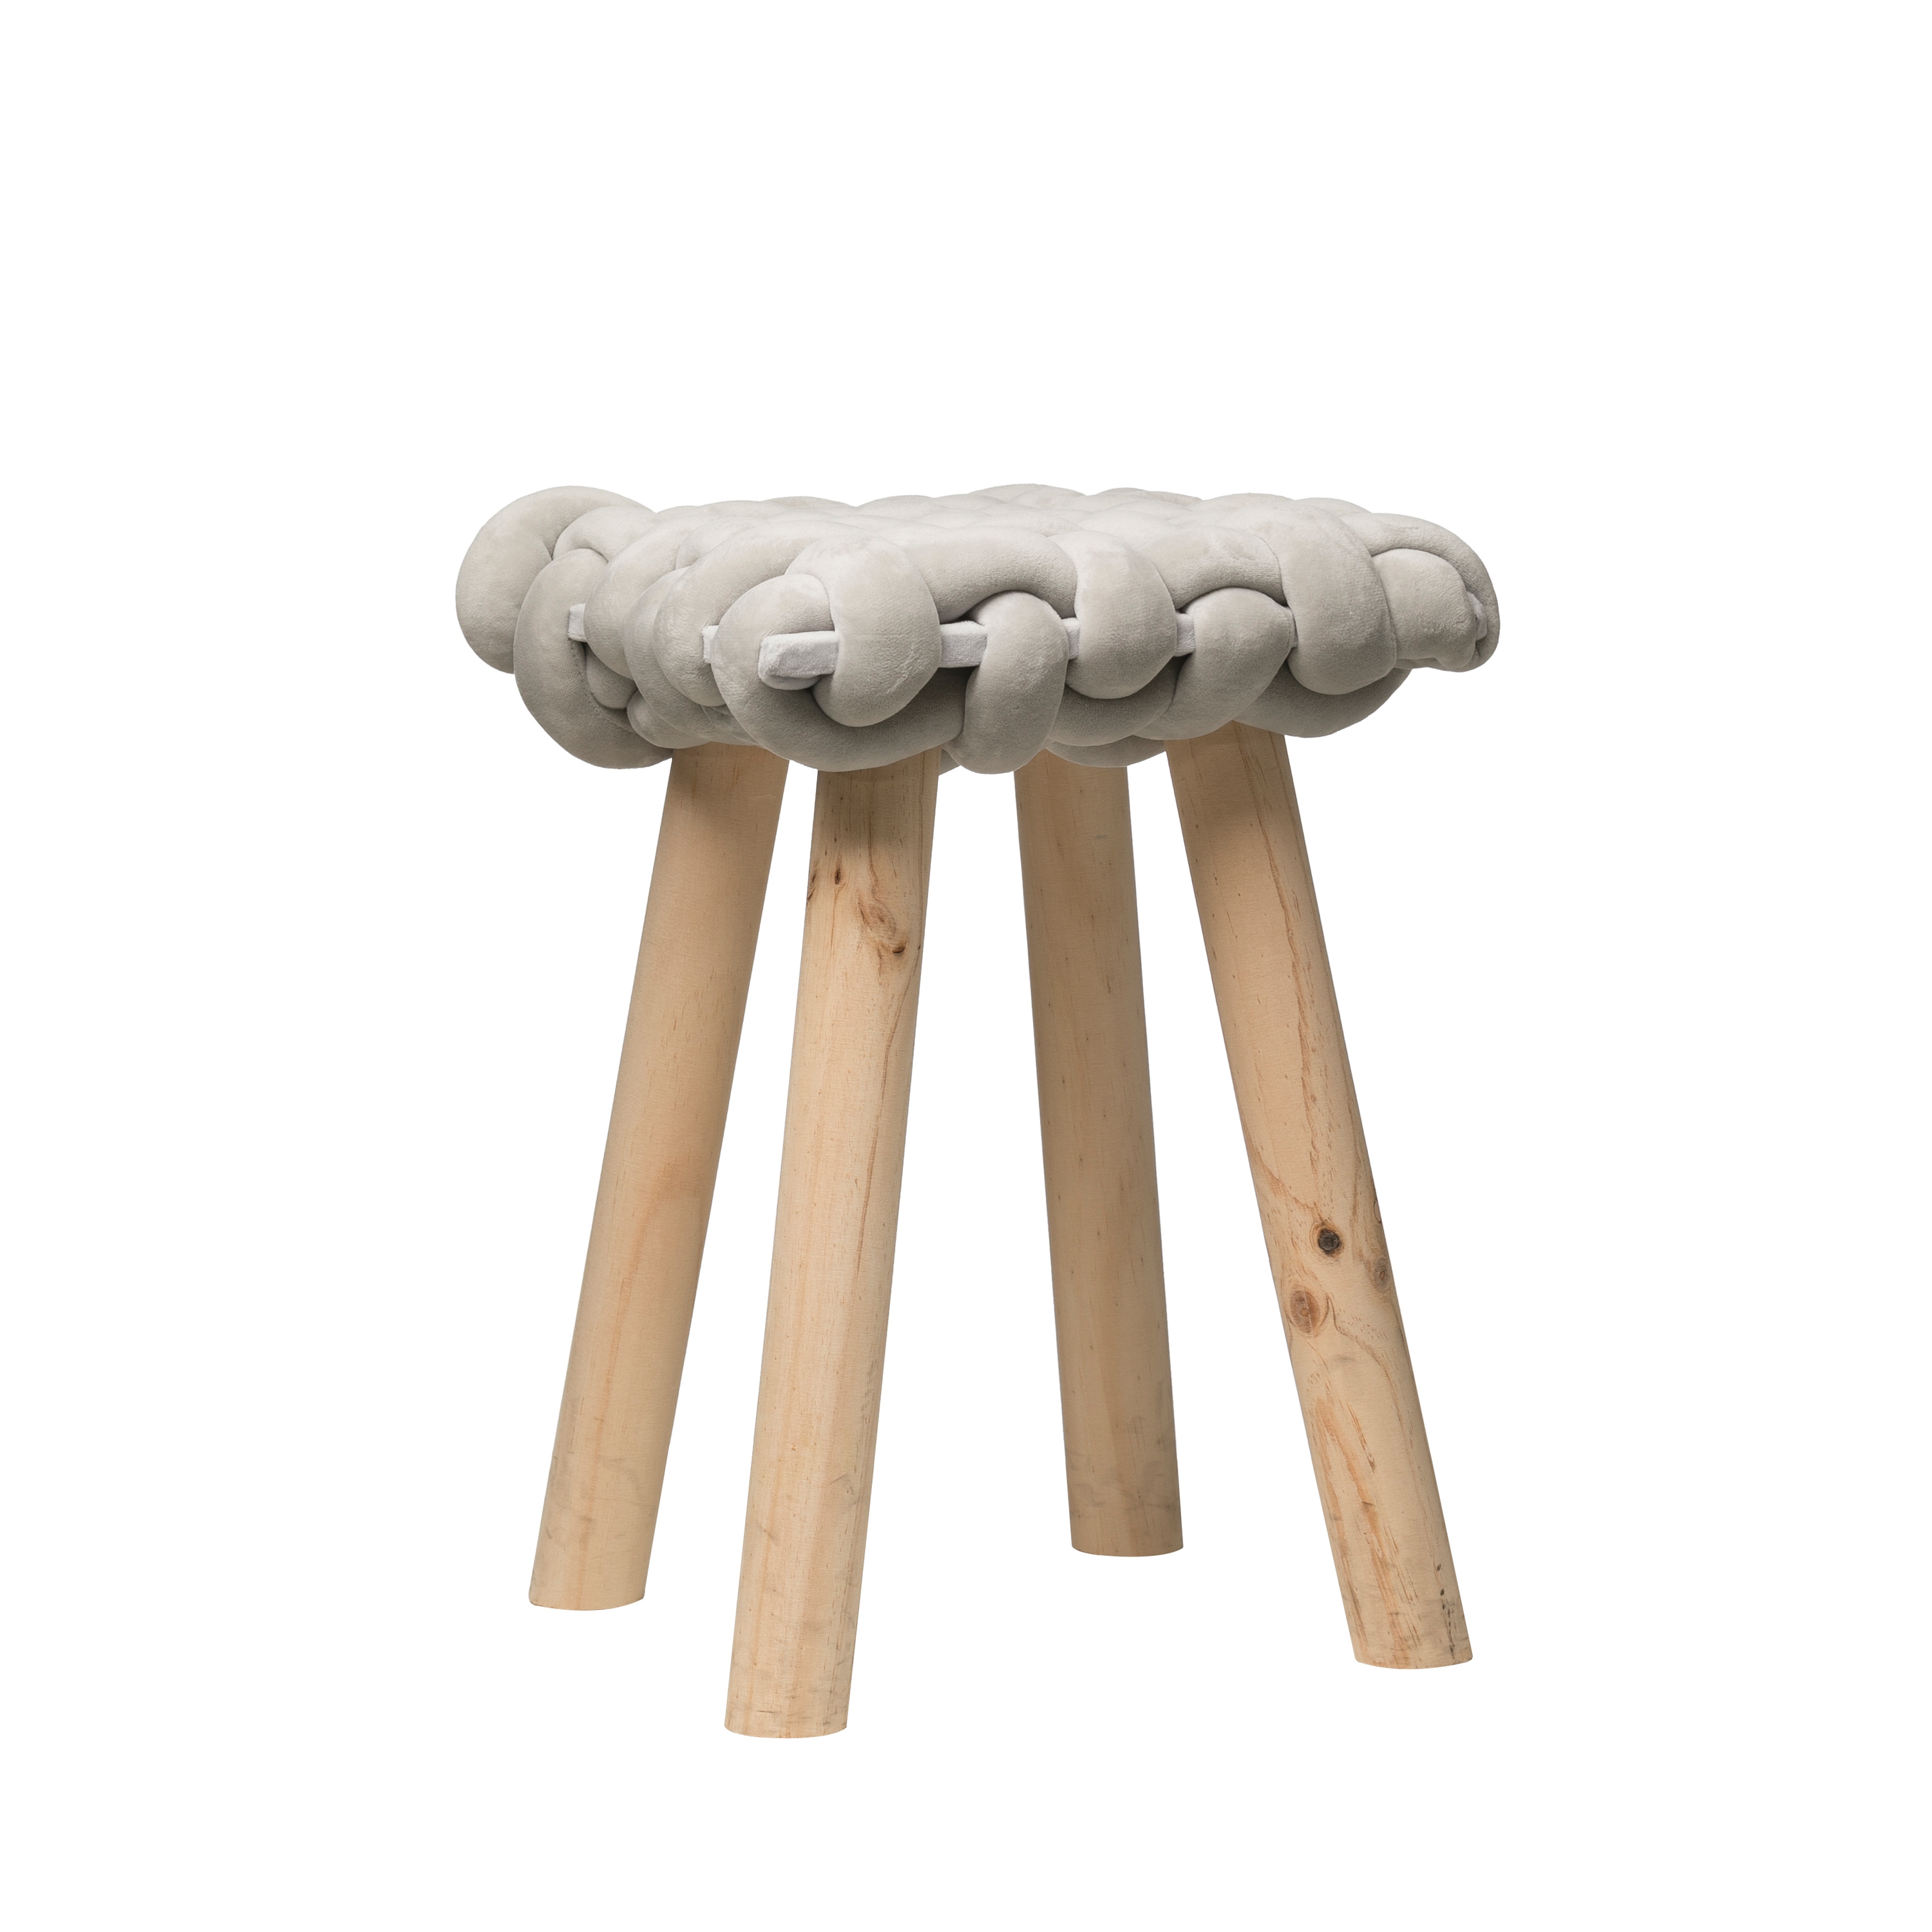 18.5"H Wood Stool with Chunky Woven Seat - Image 0